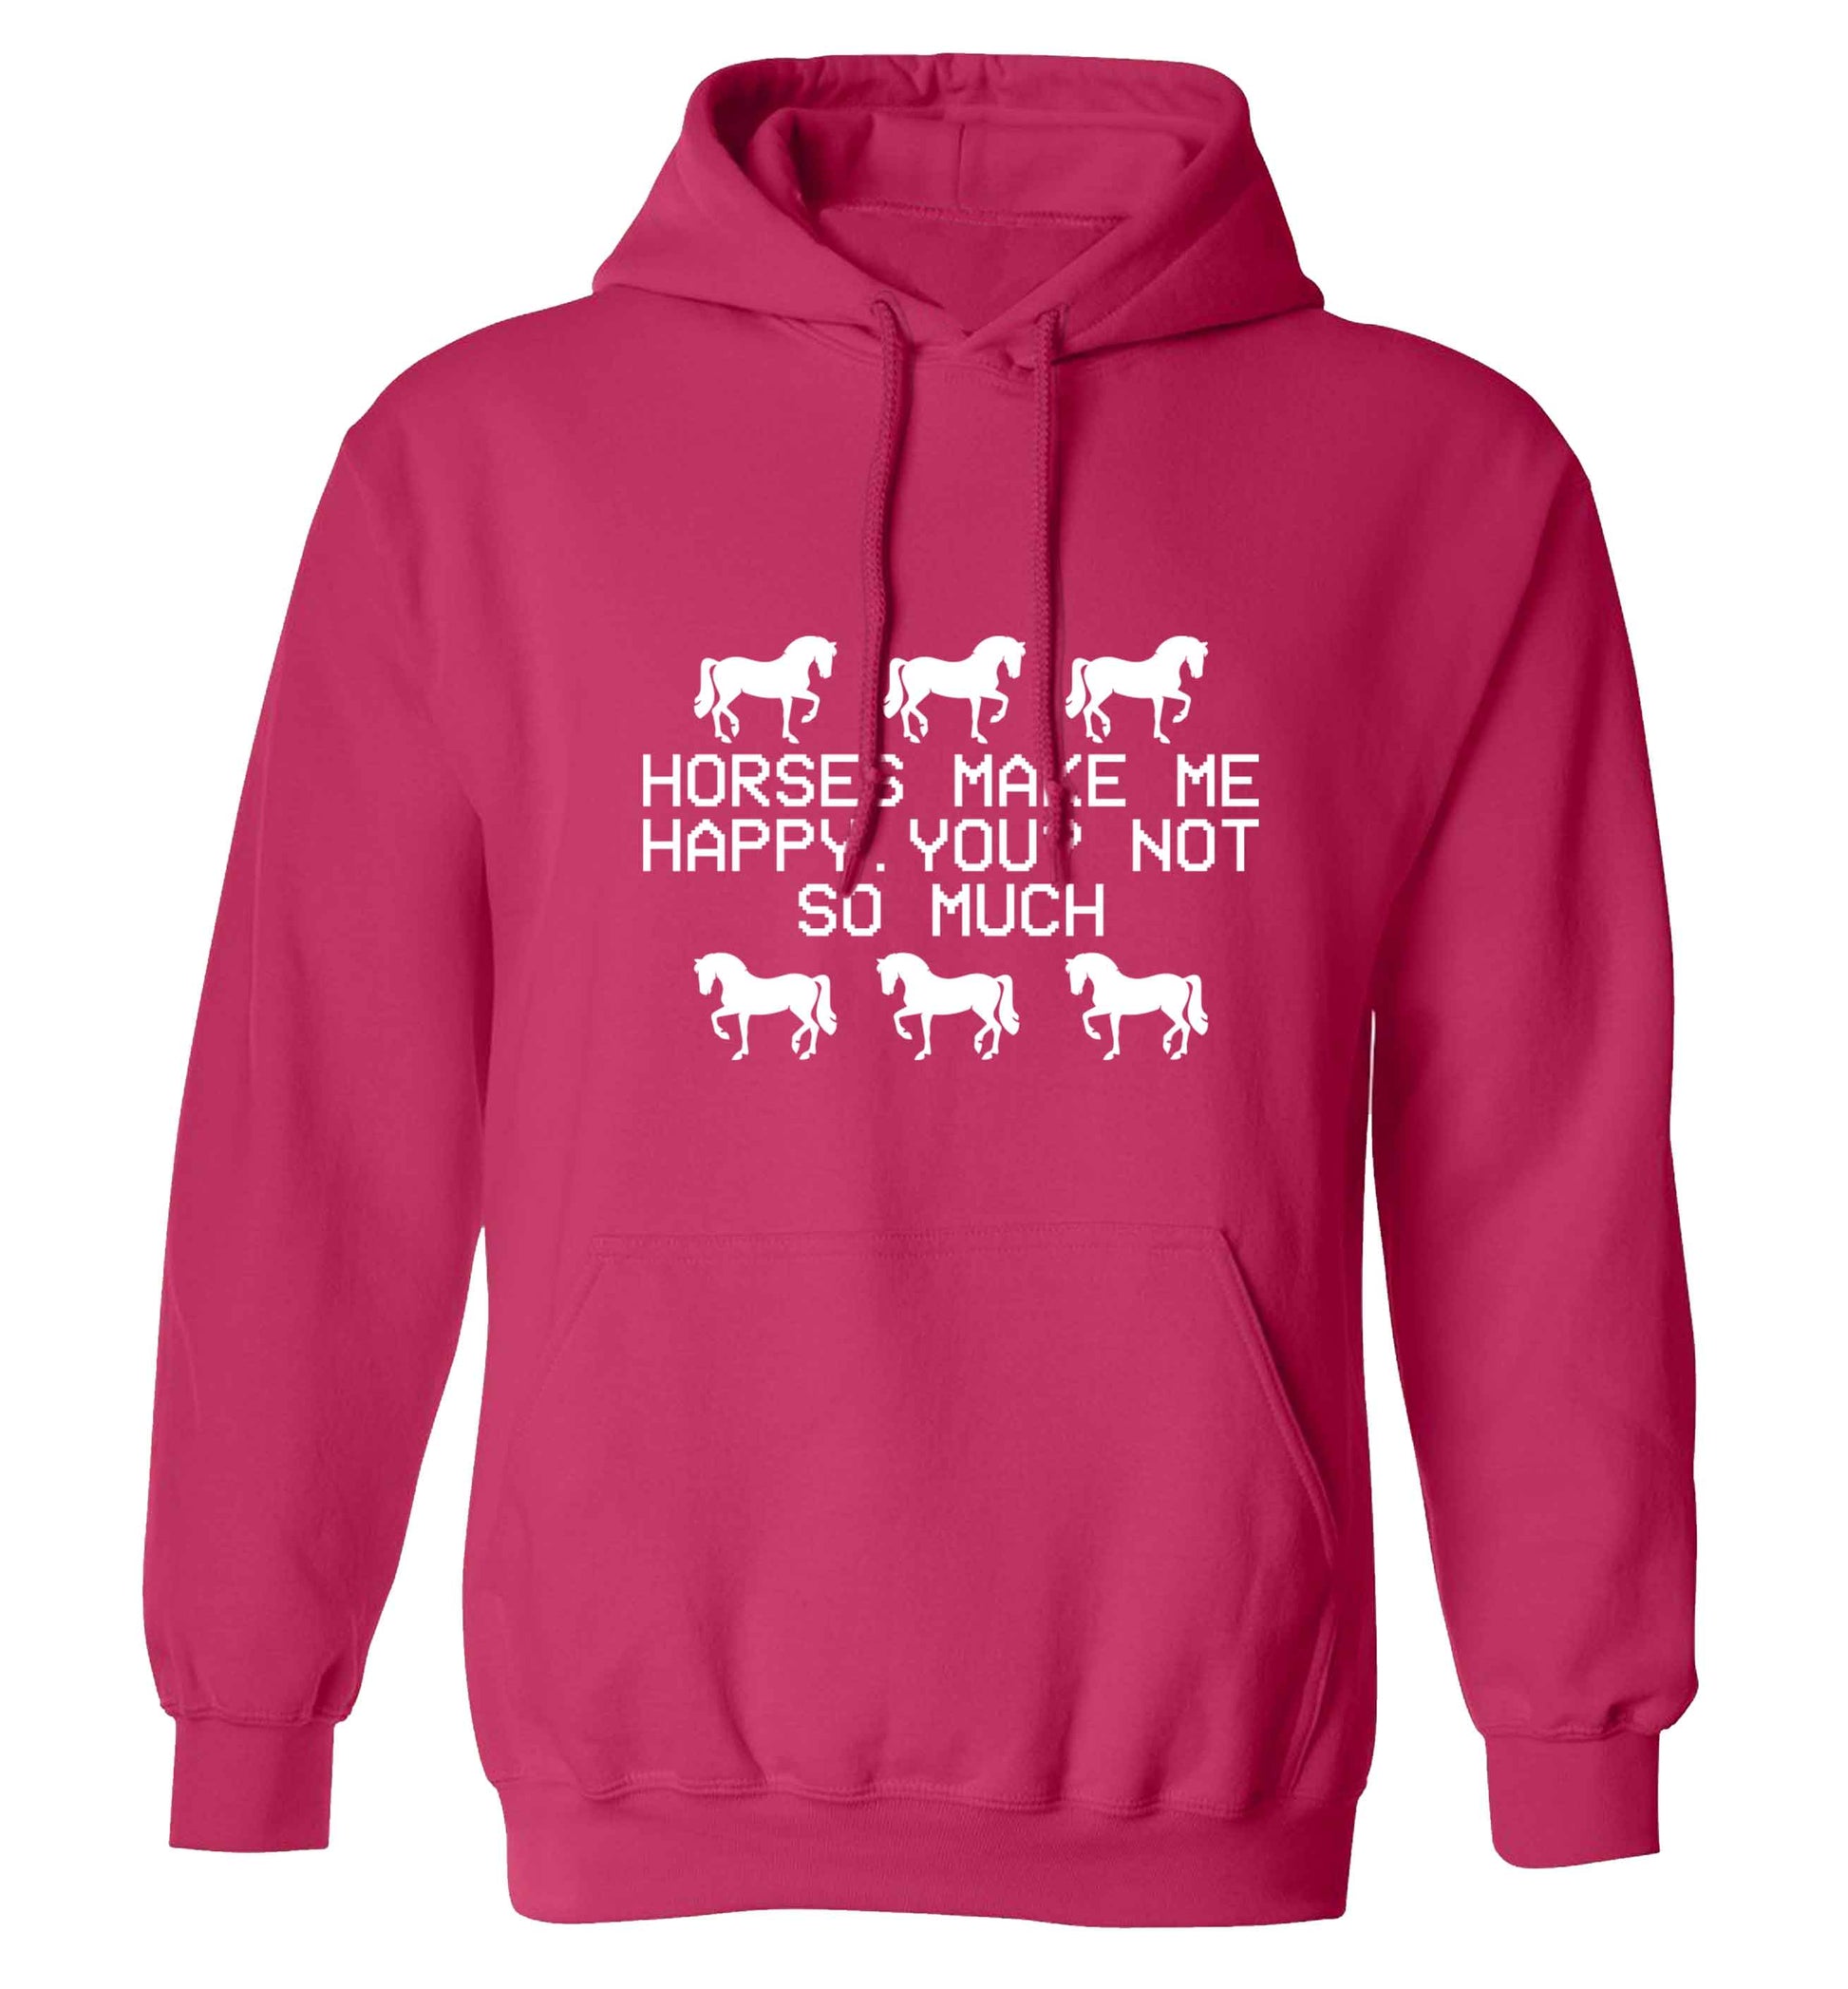 Horses make me happy, you not so much adults unisex pink hoodie 2XL